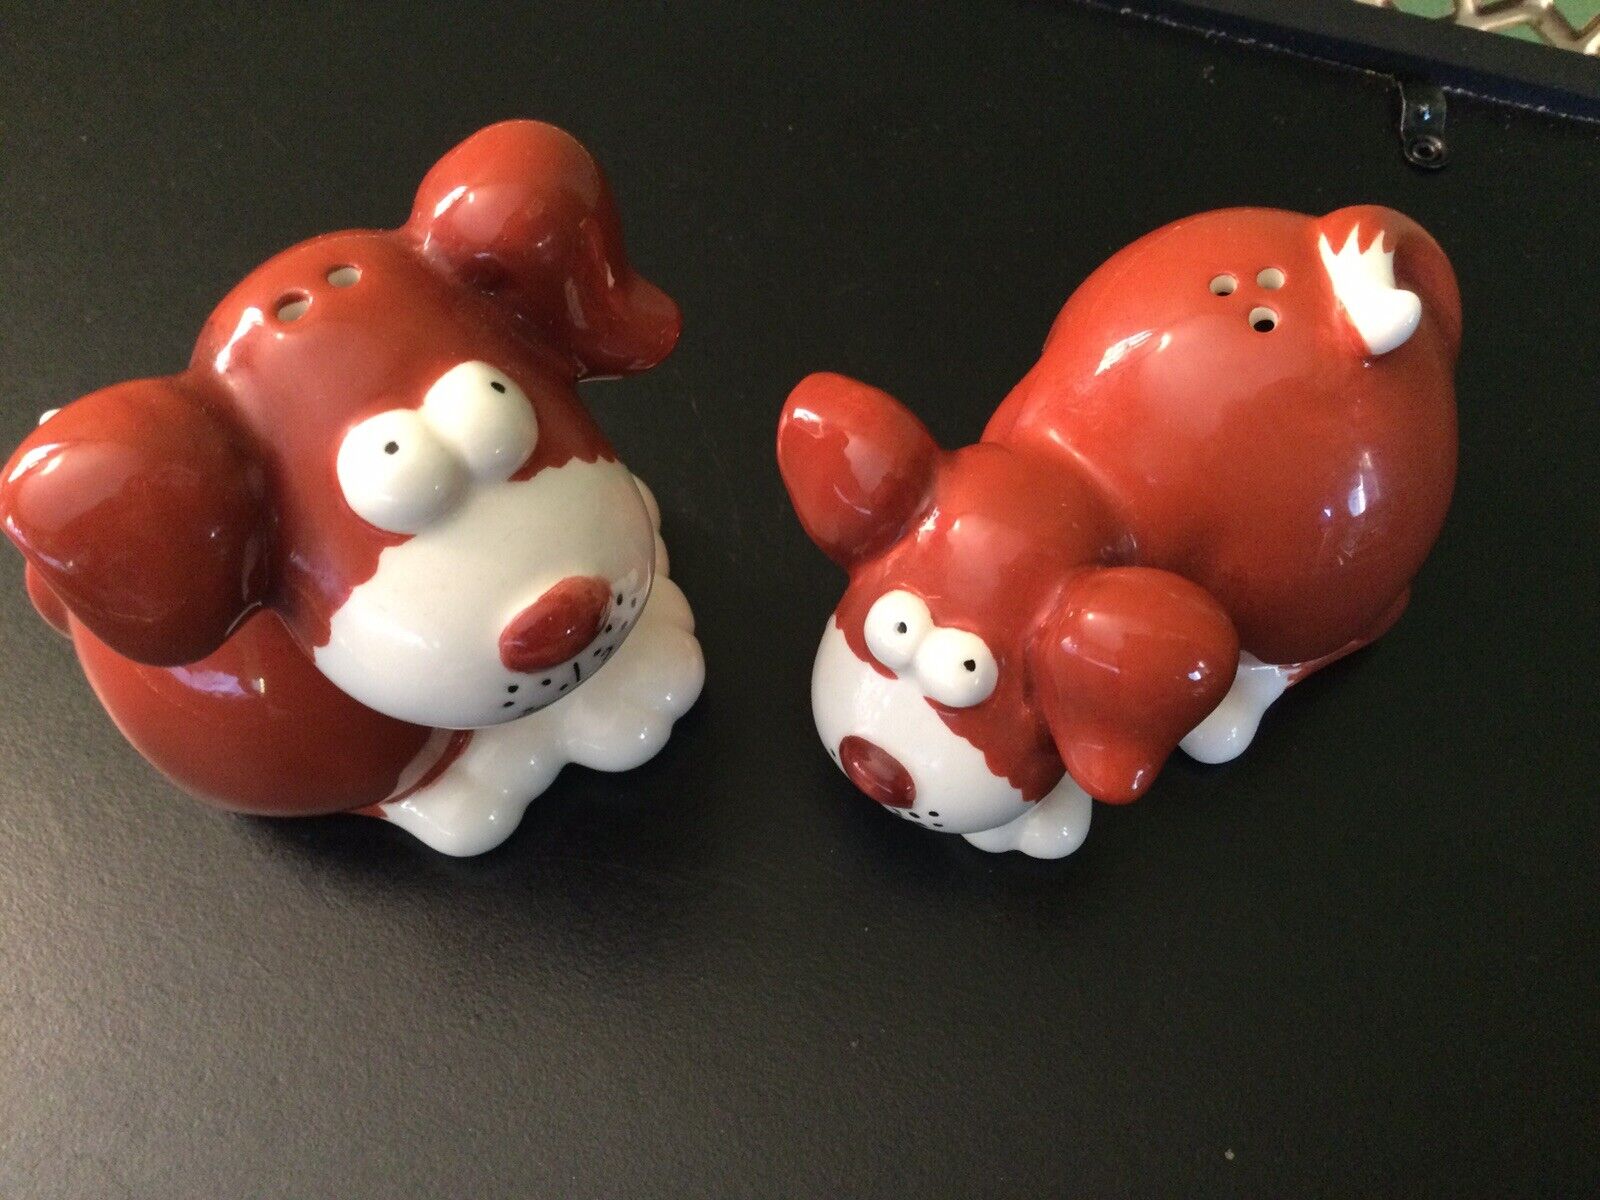 DANTES DESIGN GROUP HAND CRAFTED AND HAND PAINTED CERAMIC PUPPY S & P shakers